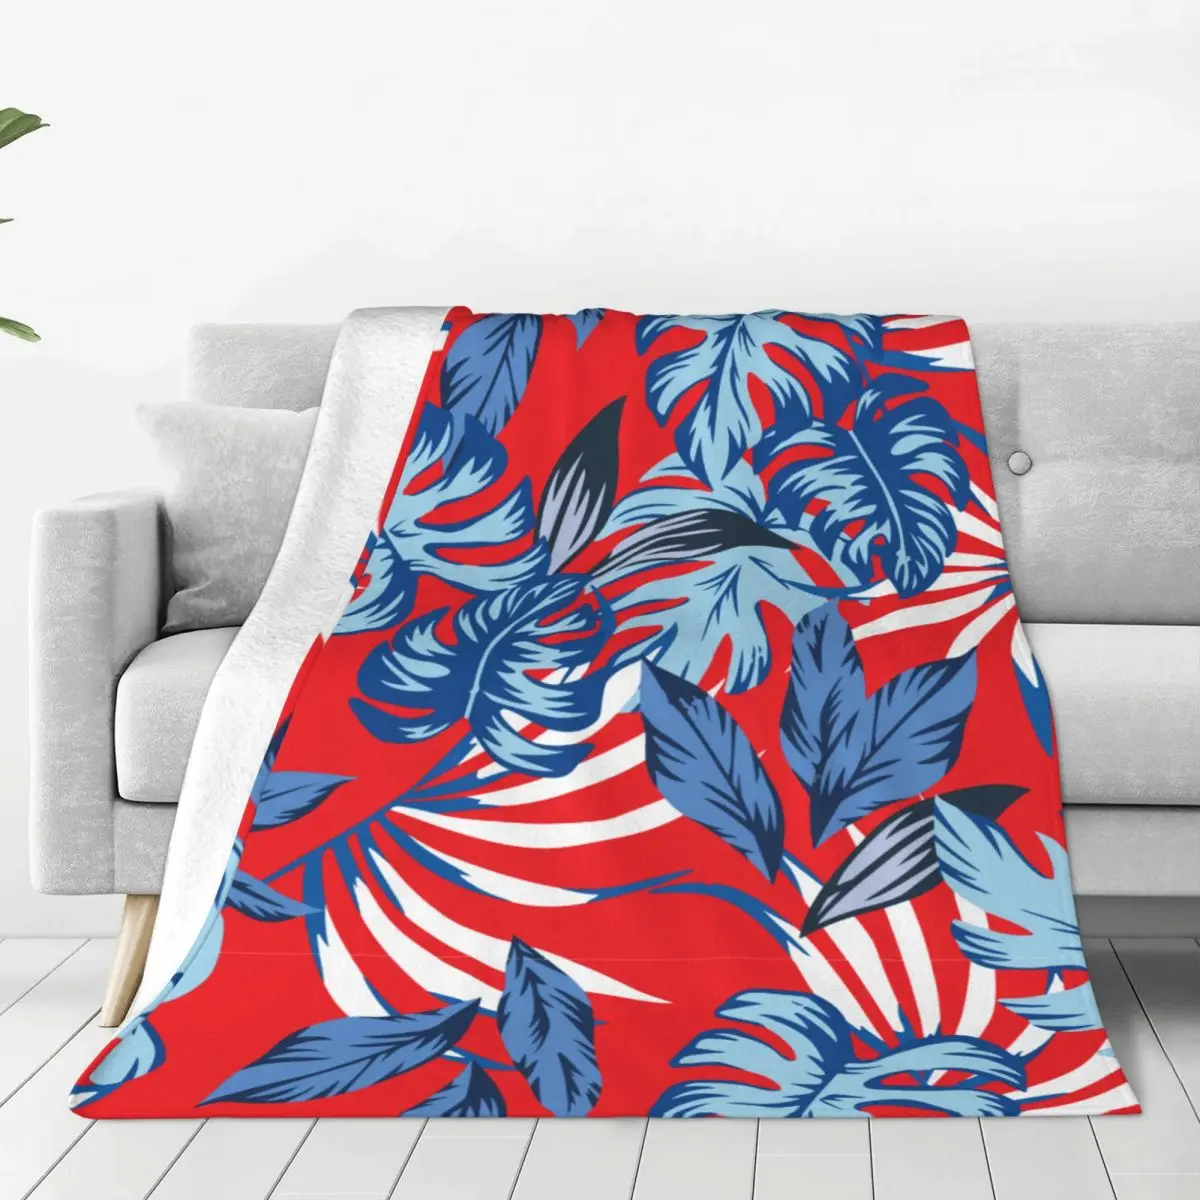 

Bright Leaves Soft Fleece Throw Blanket Warm and Cozy for All Seasons Comfy Microfiber Blanket for Couch Sofa Bed 40"x30"